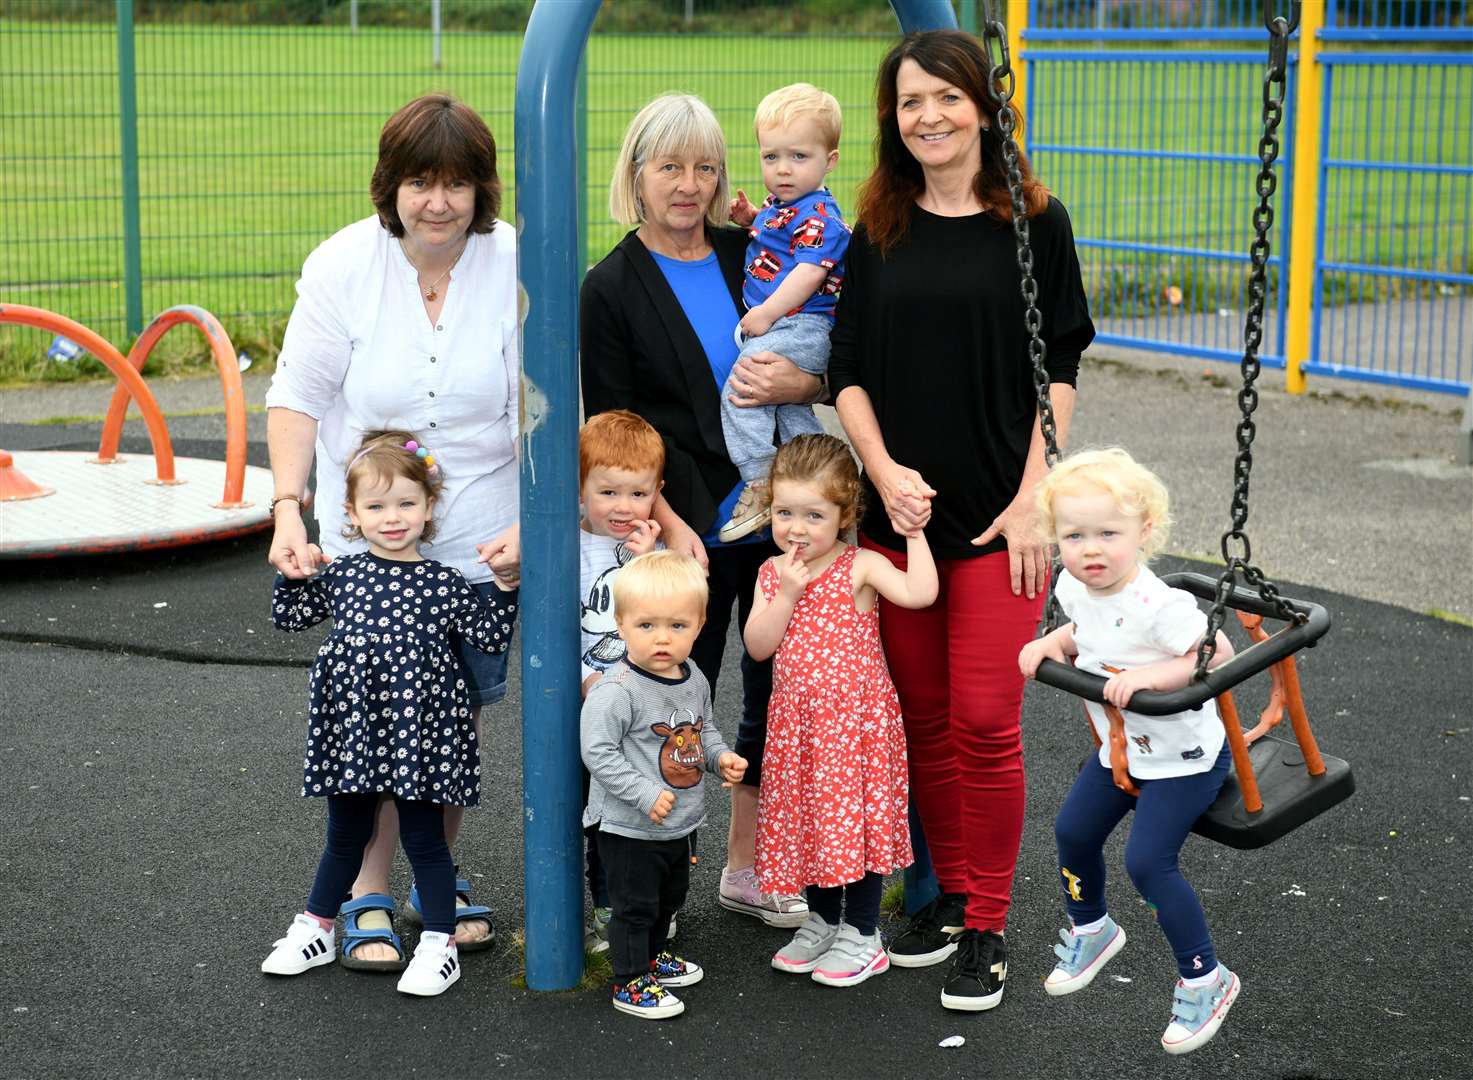 Sharon Gray from the local community with Corran Donaldson, Owen and Lyle Urquhart, Marie Maciver, Dalneigh Playpark Project, Kay Maclean, Emmie Macdonald, Liz Macintyre, Dalneigh Playpark Project and Aria Maclean. Picture: James Mackenzie.